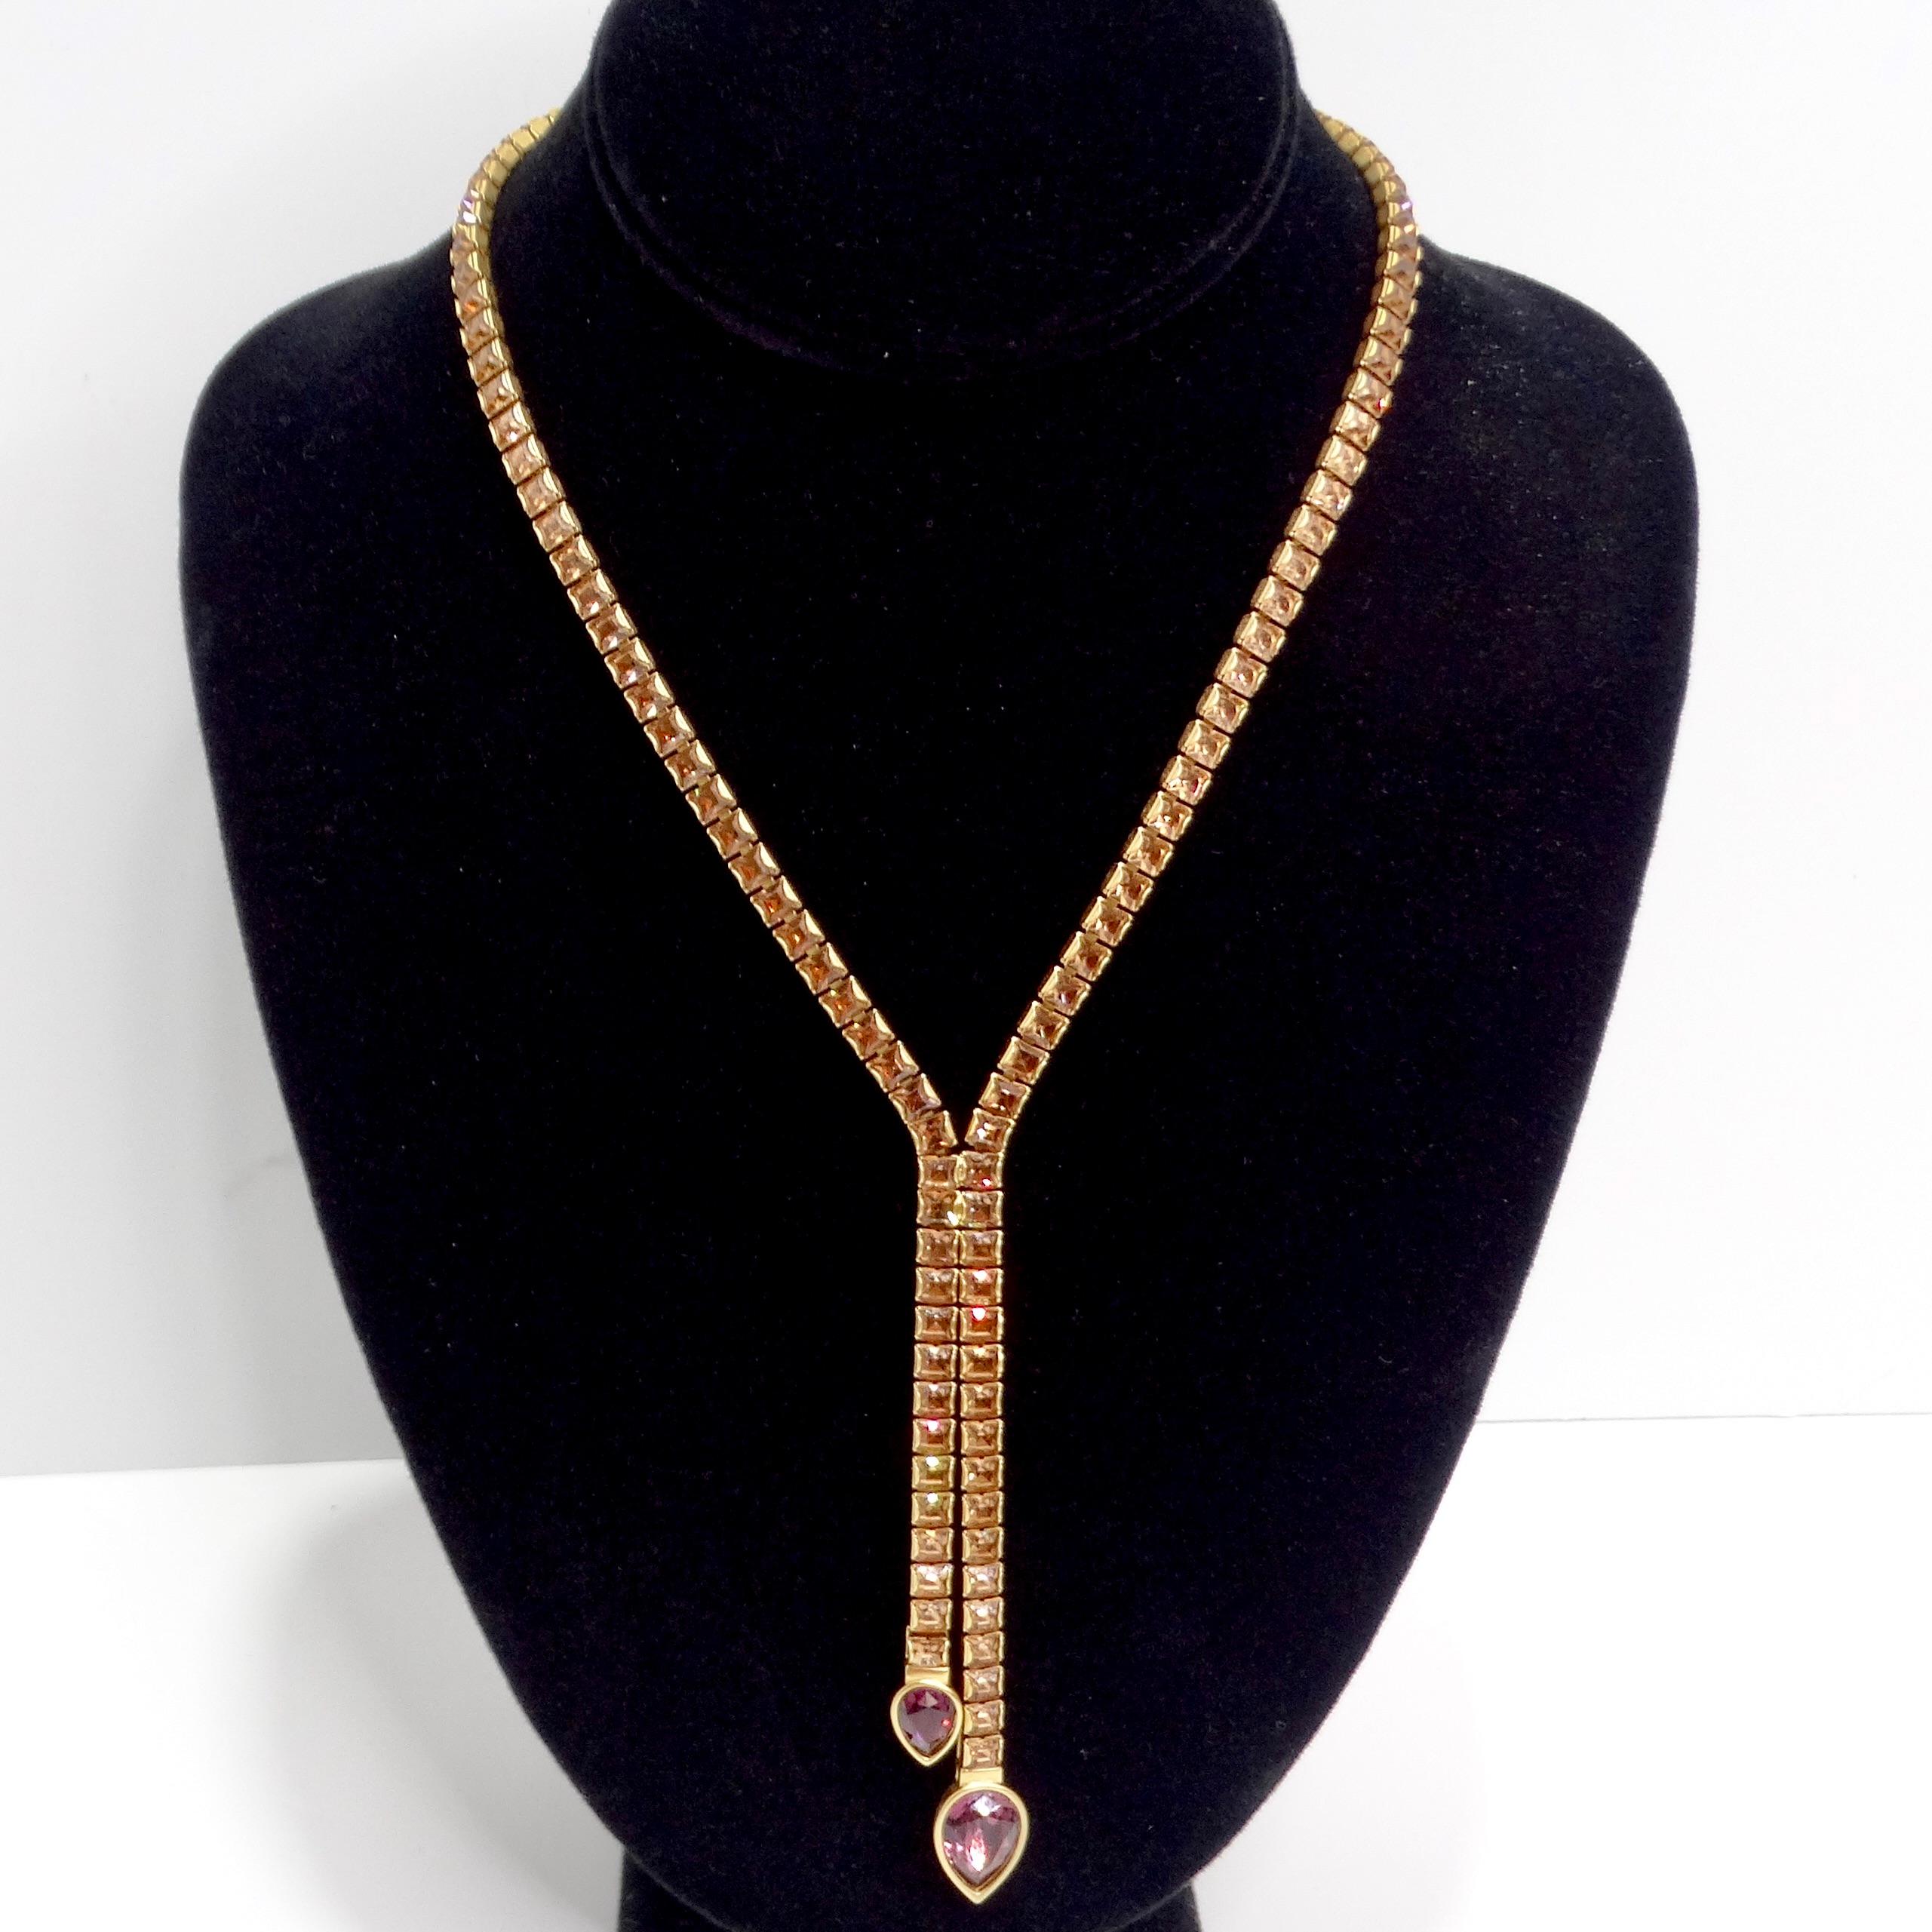 Elevate your style with the Swarovski 1990s Purple Rhinestone Lariat Choker, a stunning piece that exudes elegance and sophistication. This exquisite lariat-style necklace is a timeless design from the 1990s, crafted with gold tone Swarovski